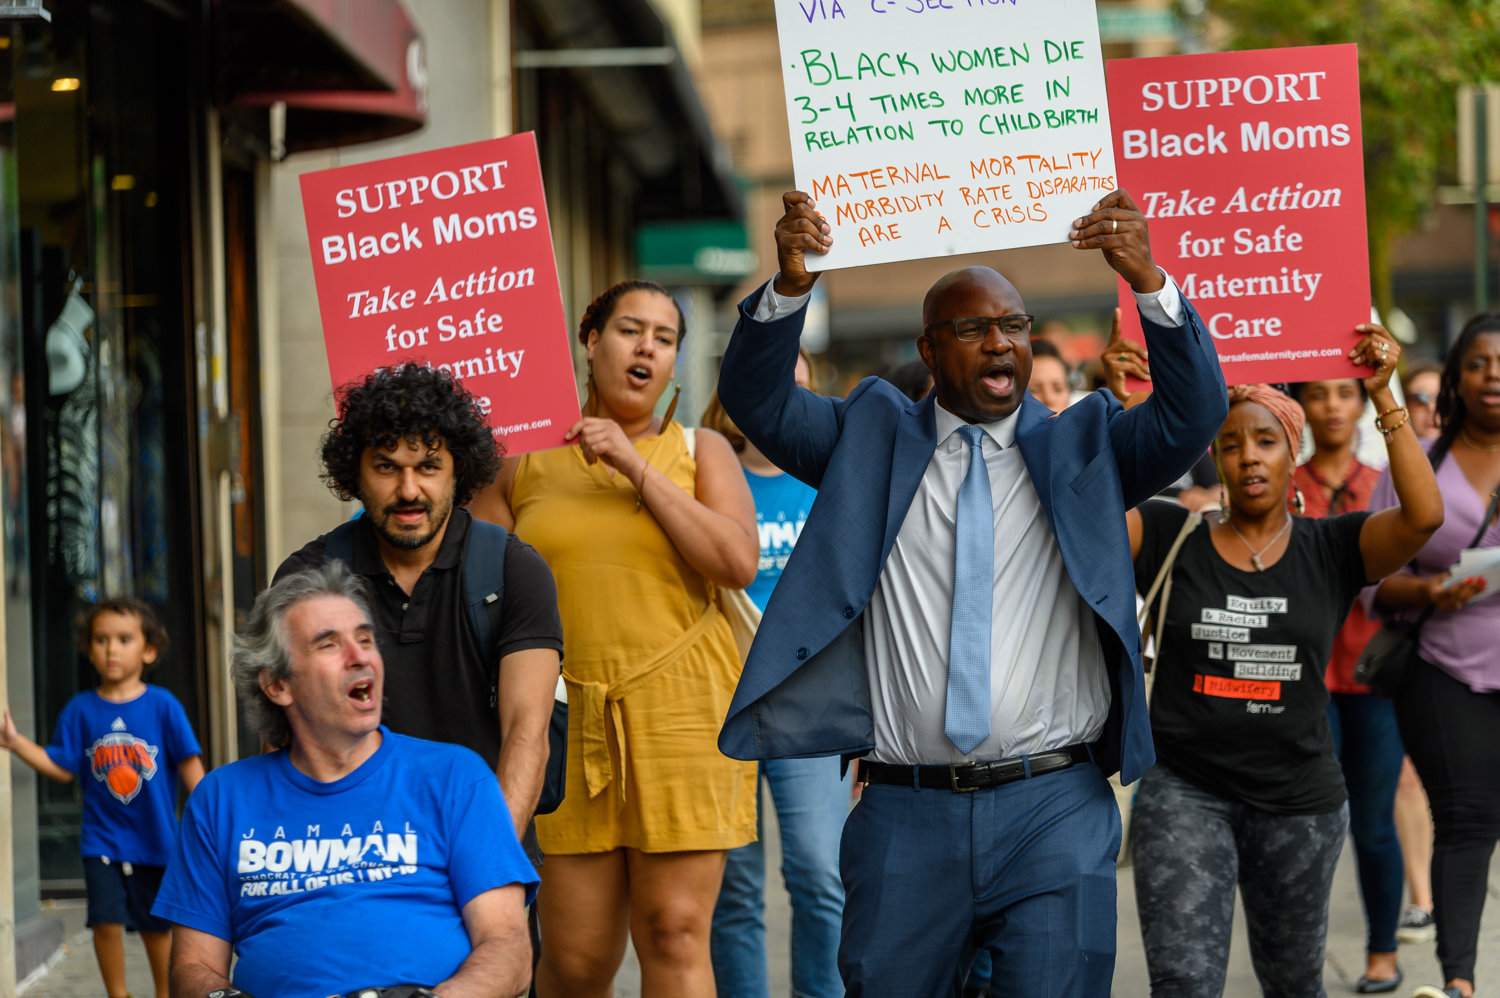 Jamaal Bowman, center right, participates in a march last September as part of his campaign to unseat U.S. Rep. Eliot Engel in the upcoming Democratic primary. Of all of Engel’s challengers, Bowman has raised the most money.